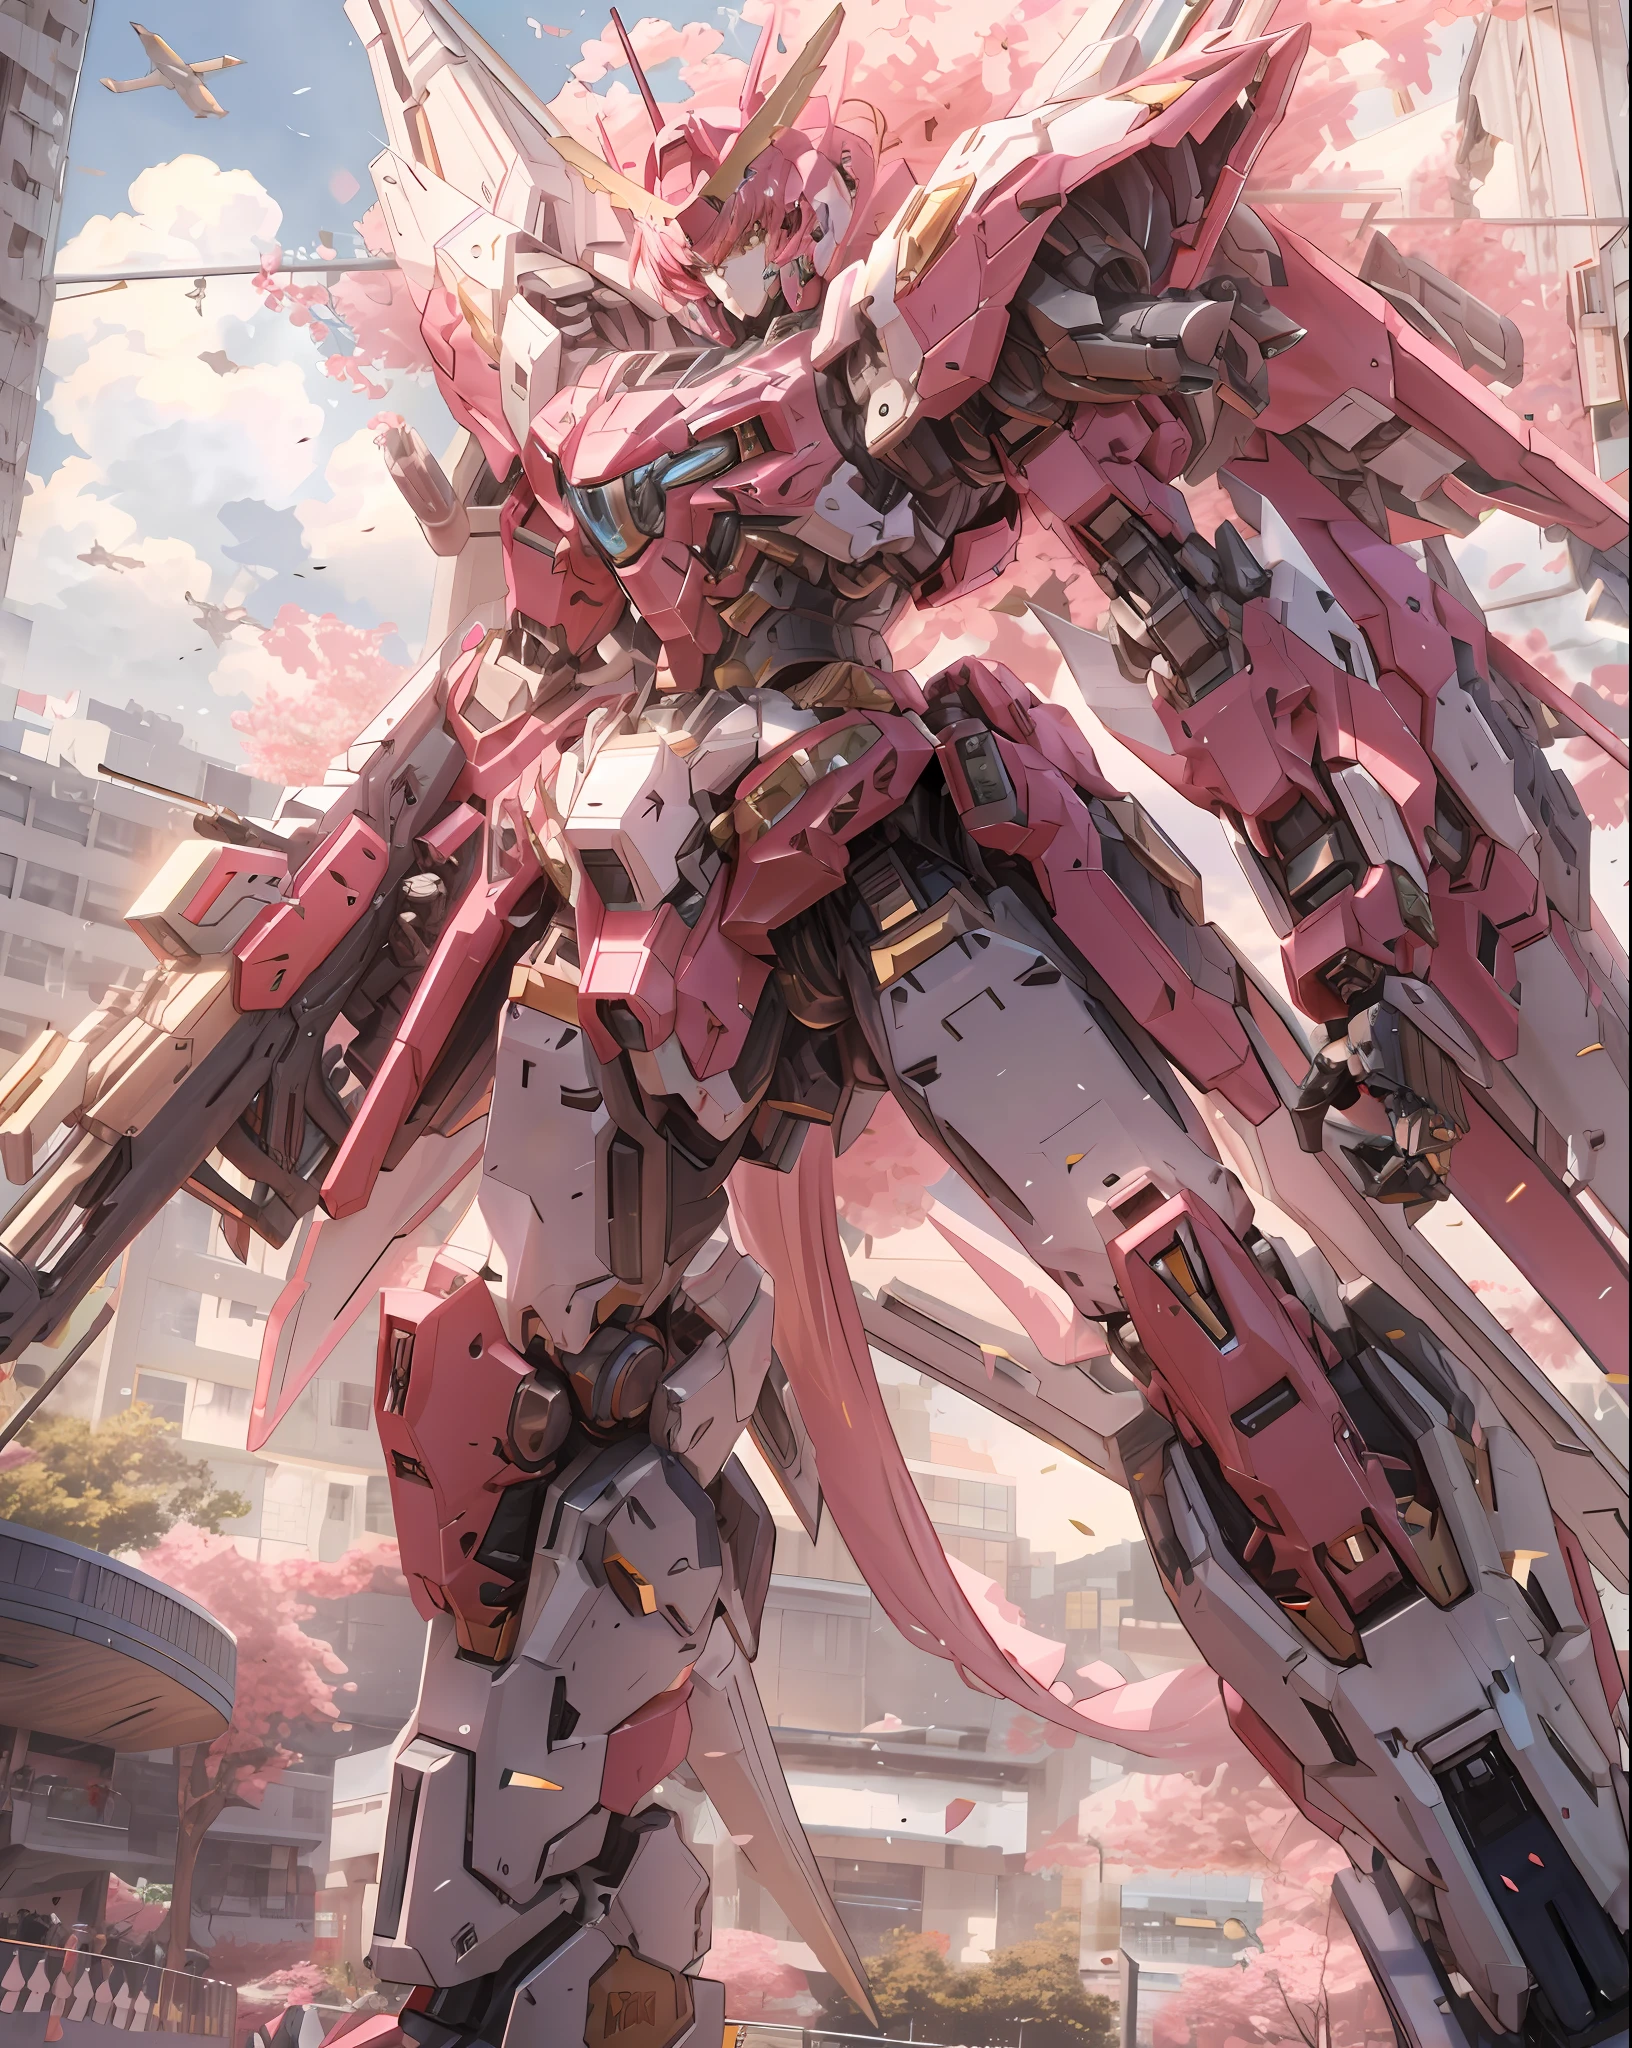 a close up of a robot with a gun in a city, anime mecha aesthetic, best anime 4k konachan wallpaper, mecha asthetic, ethereal and mecha theme, anime robotic mixed with organic, mechanized valkyrie girl, female mecha, streamlined pink armor, cool mecha style, modern mecha anime, cyberpunk anime girl mech --auto --s2